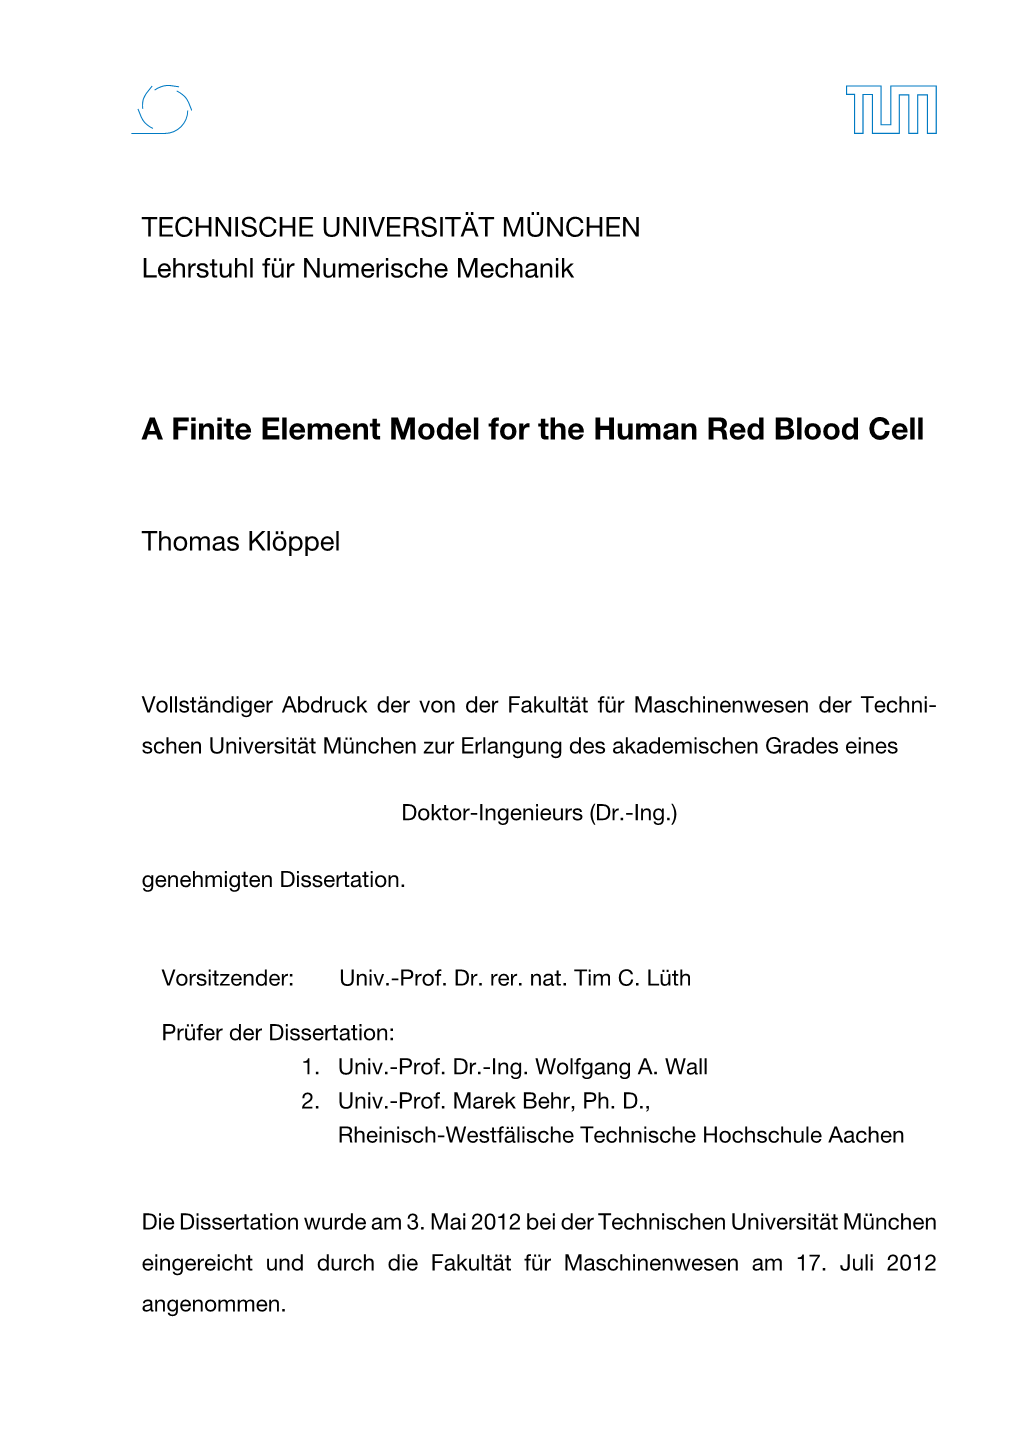 A Finite Element Model for the Human Red Blood Cell